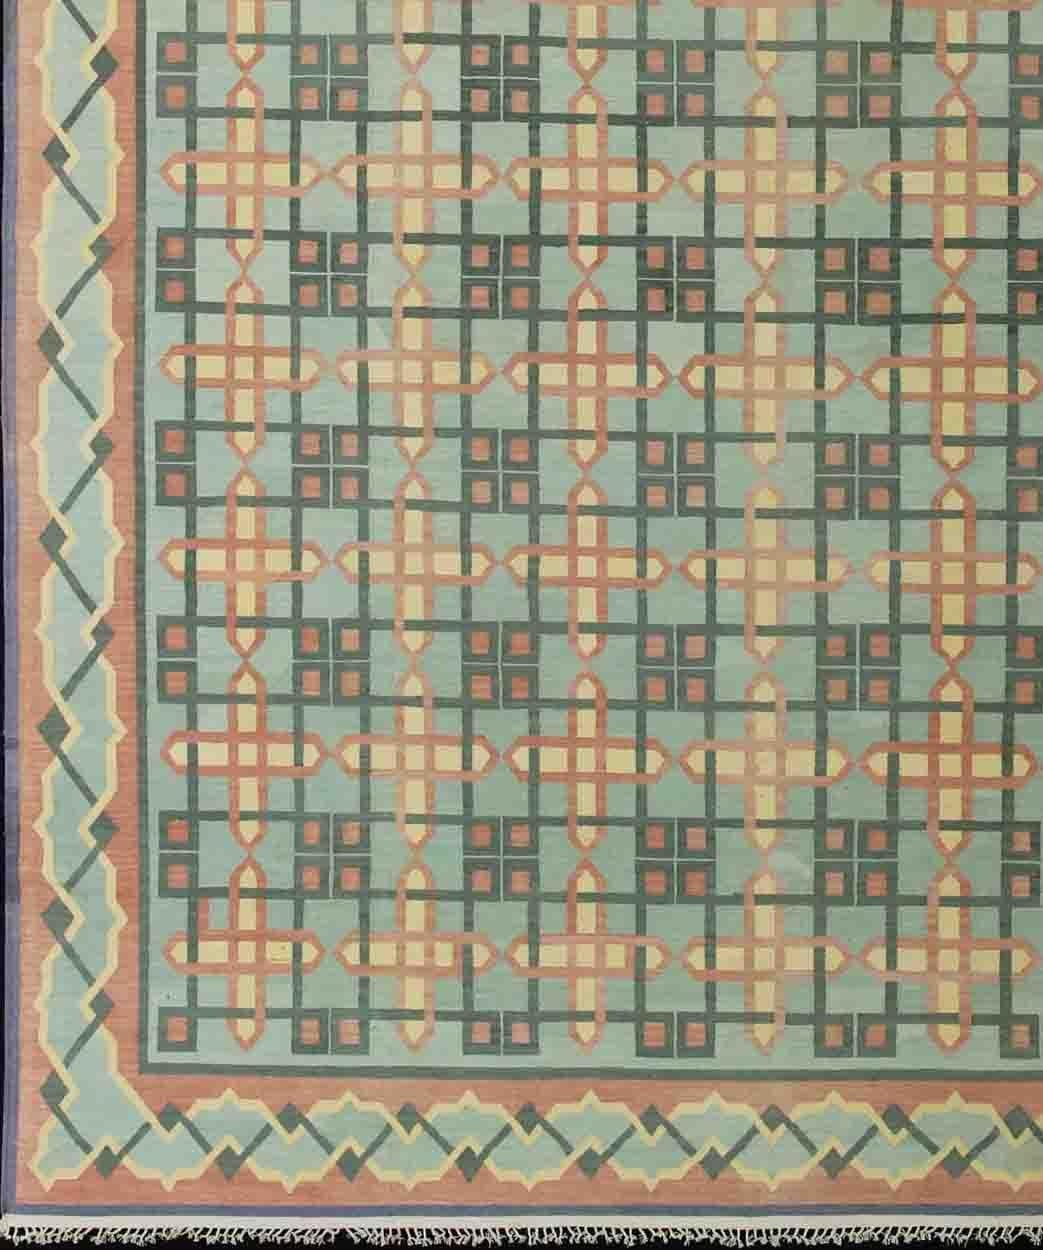 Large cotton Dhurrie in large scale checkerboard design, Indian Dhurrie, rug 19-0604, country of origin / type: India / Dhurrie, circa 1960

This flat-woven designer Dhurrie from mid-20th century is made India and features an all-over checkerboard